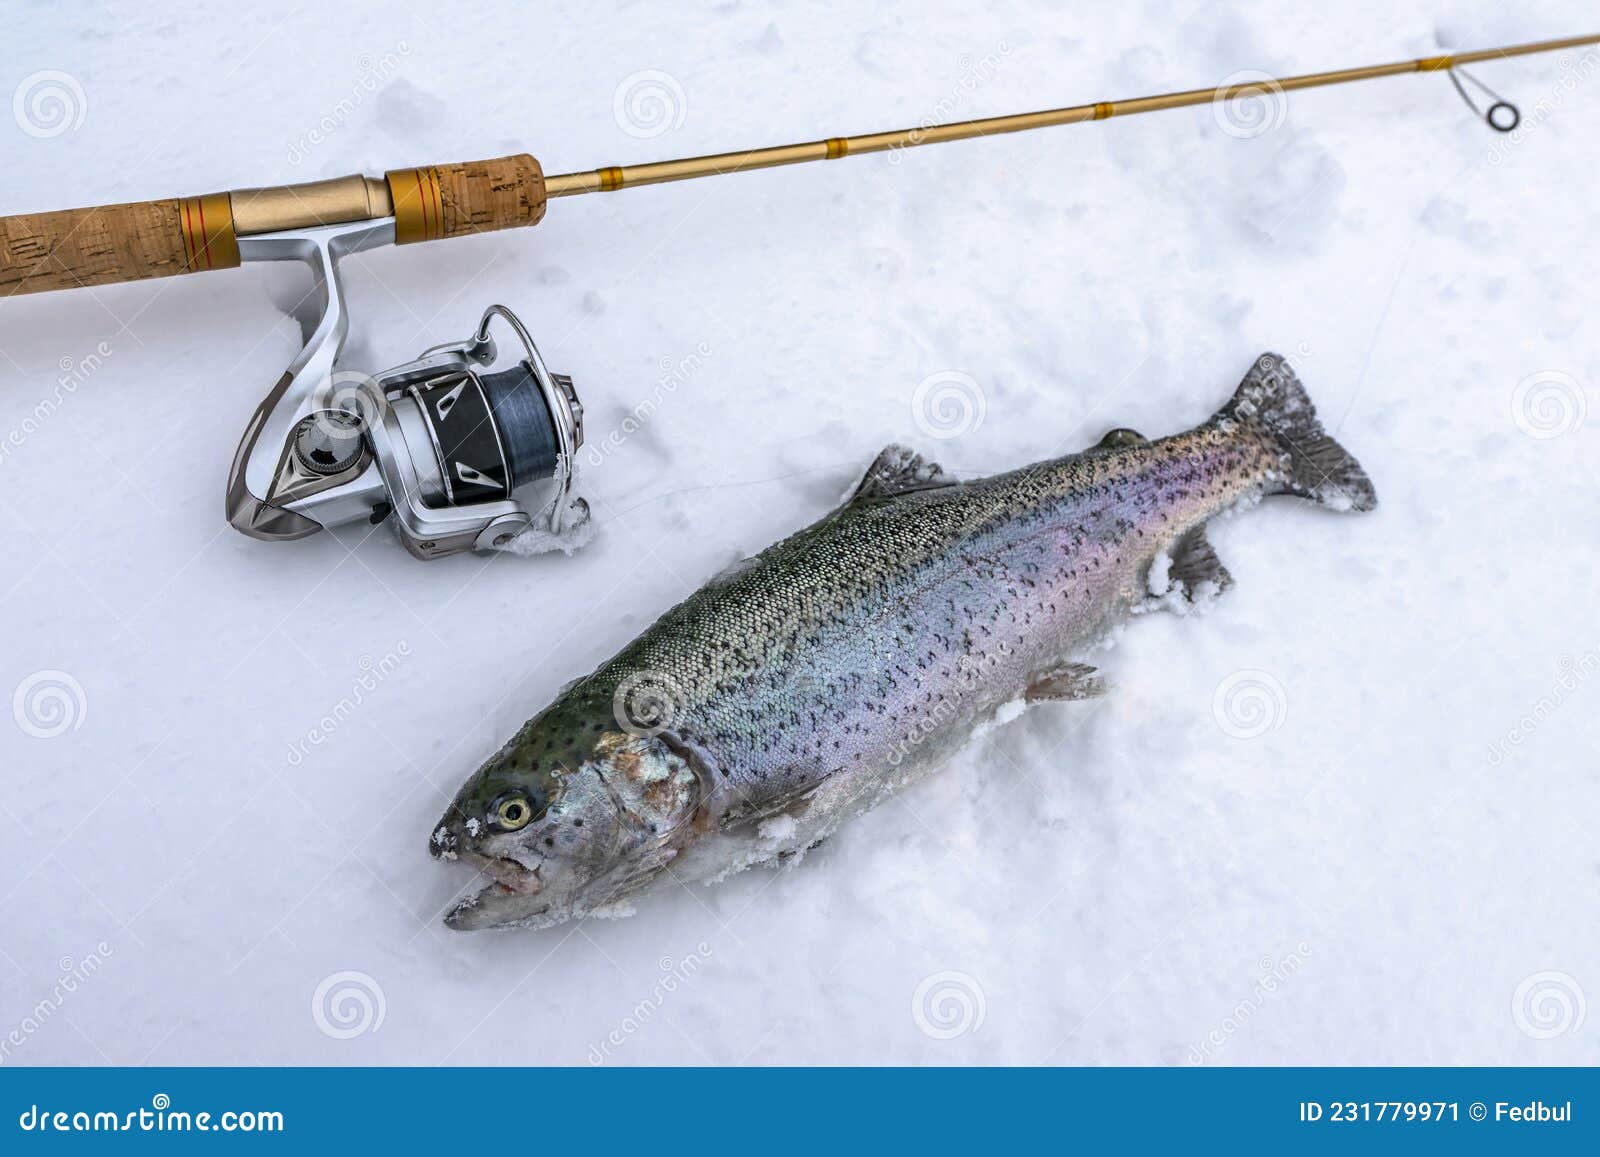 Rainbow Trout Fish and Spinning Rod on Snow. Winter Trout Fishing